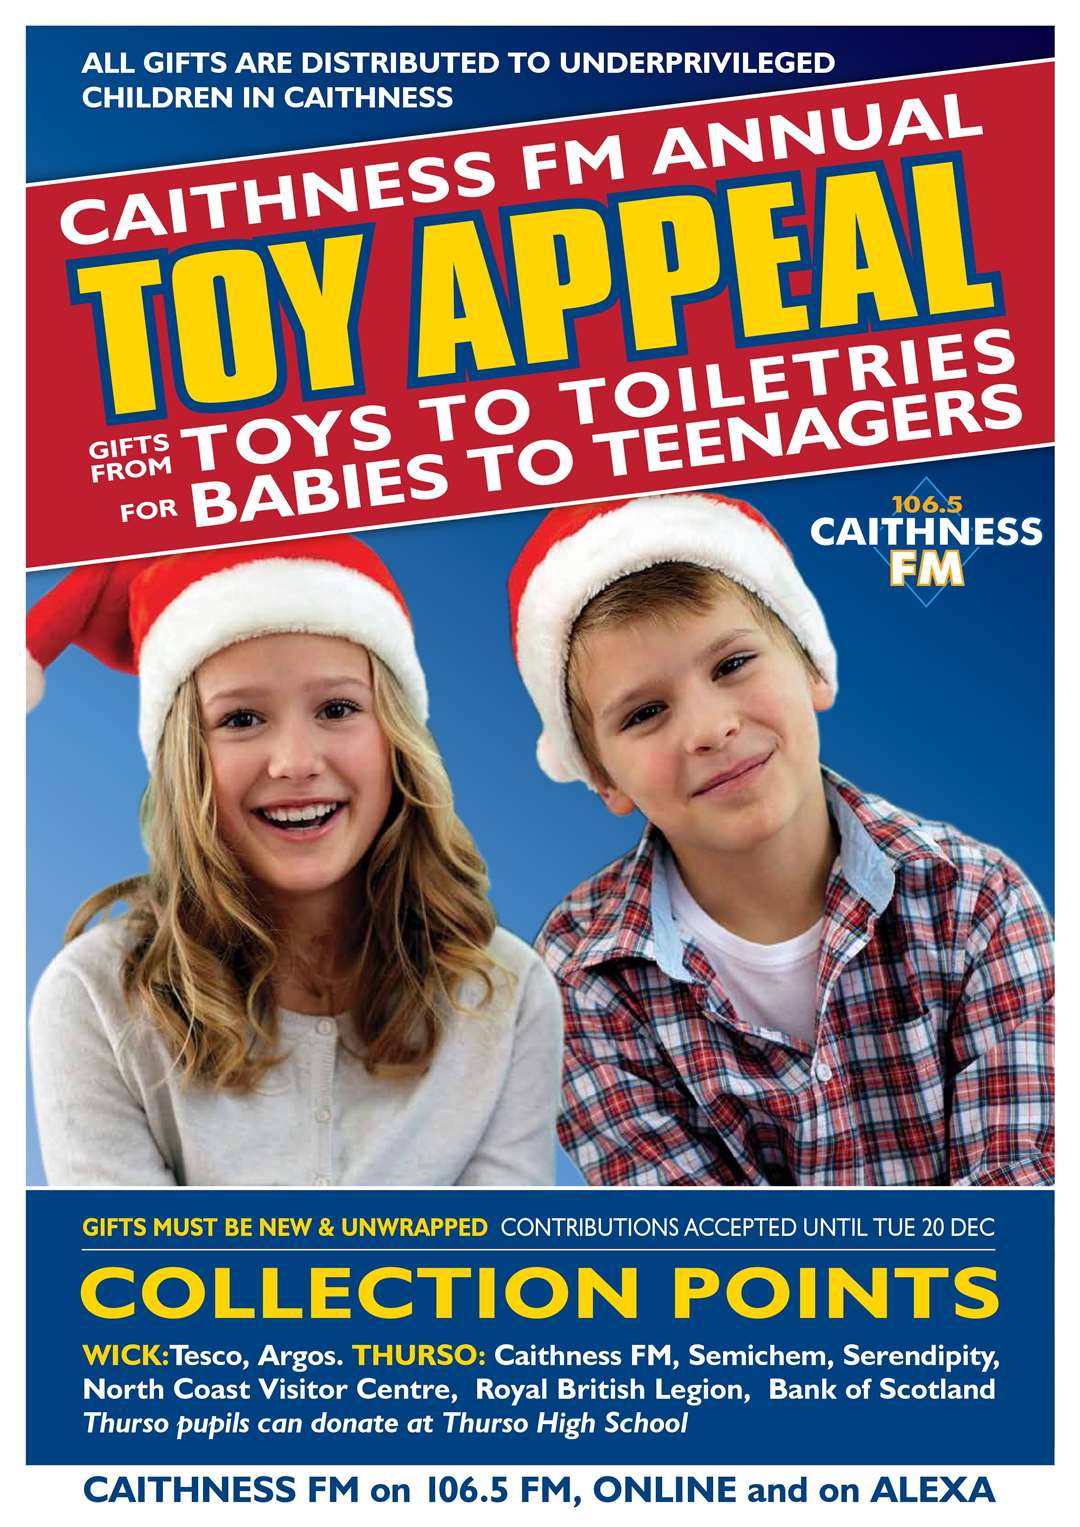 Toy appeal poster.